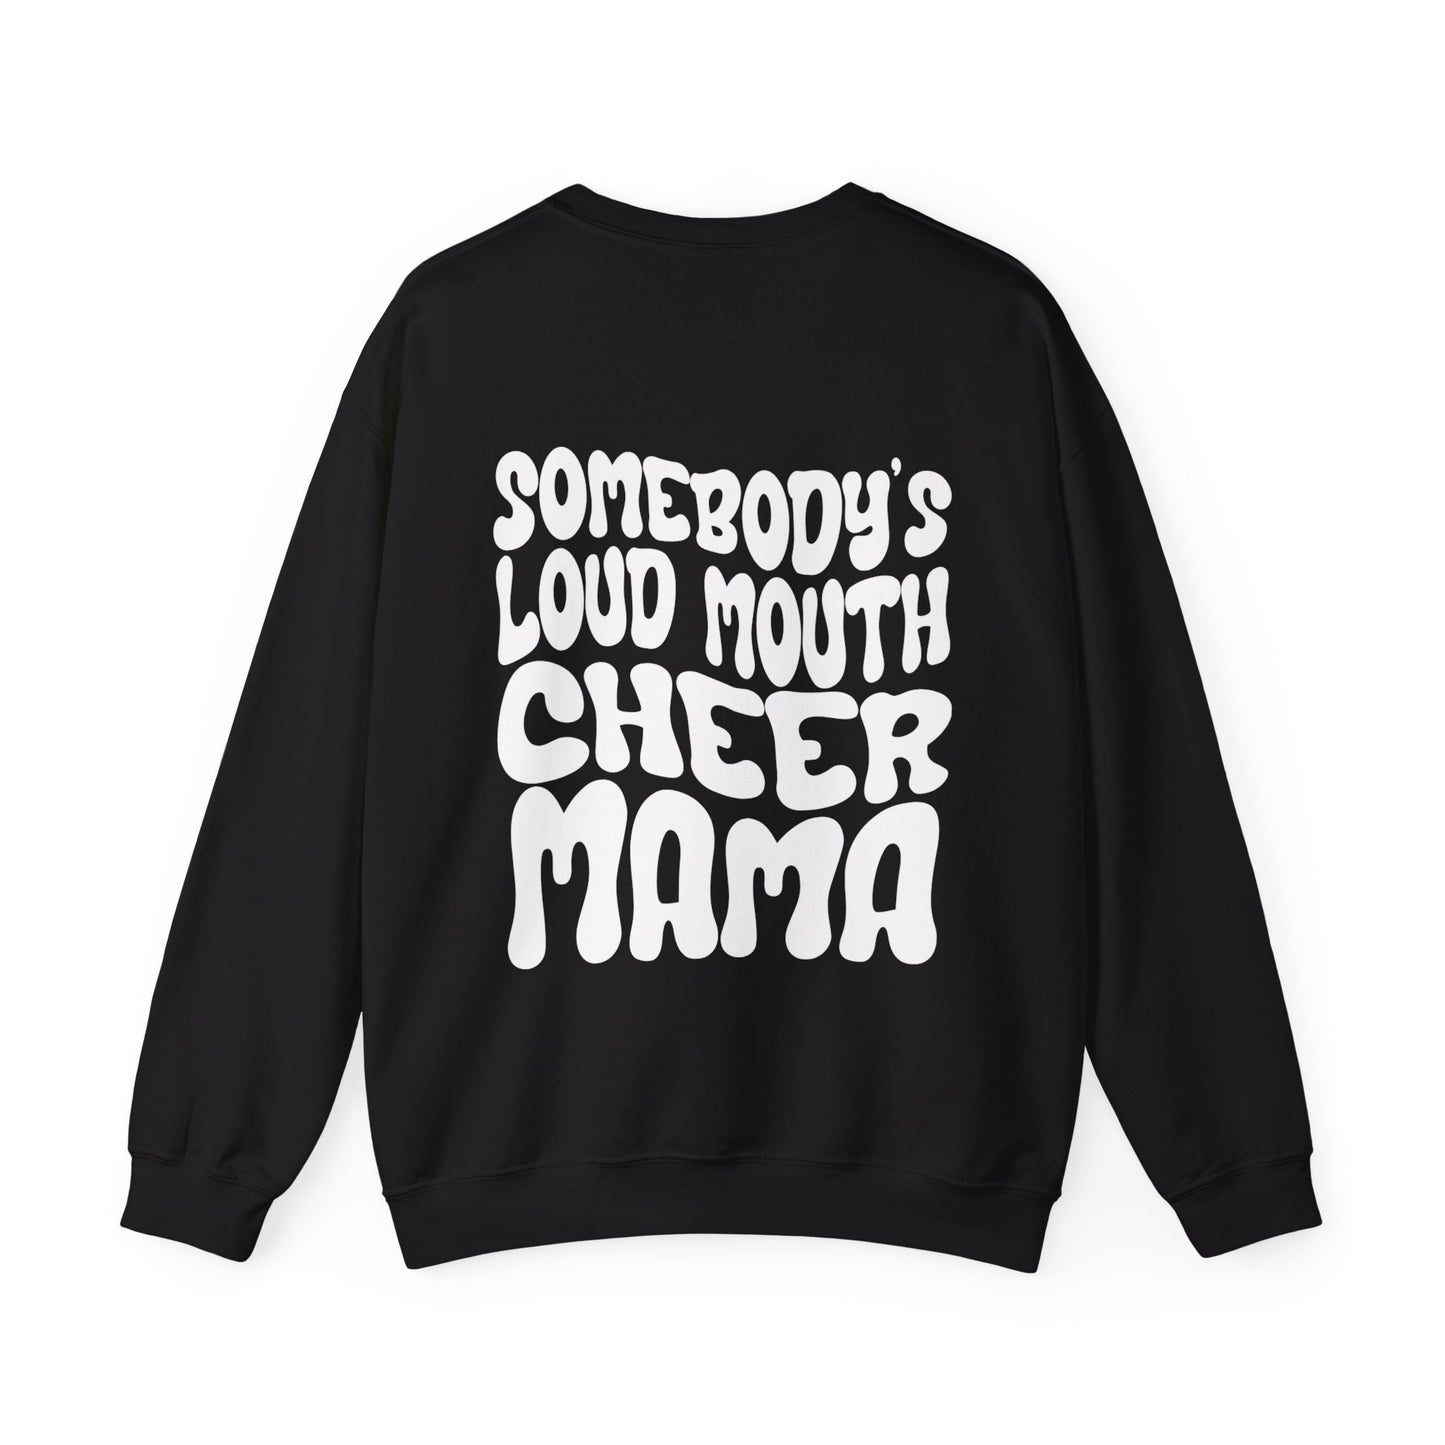 Loud Mouth Cheer Mama Sweatshirt (white letters)